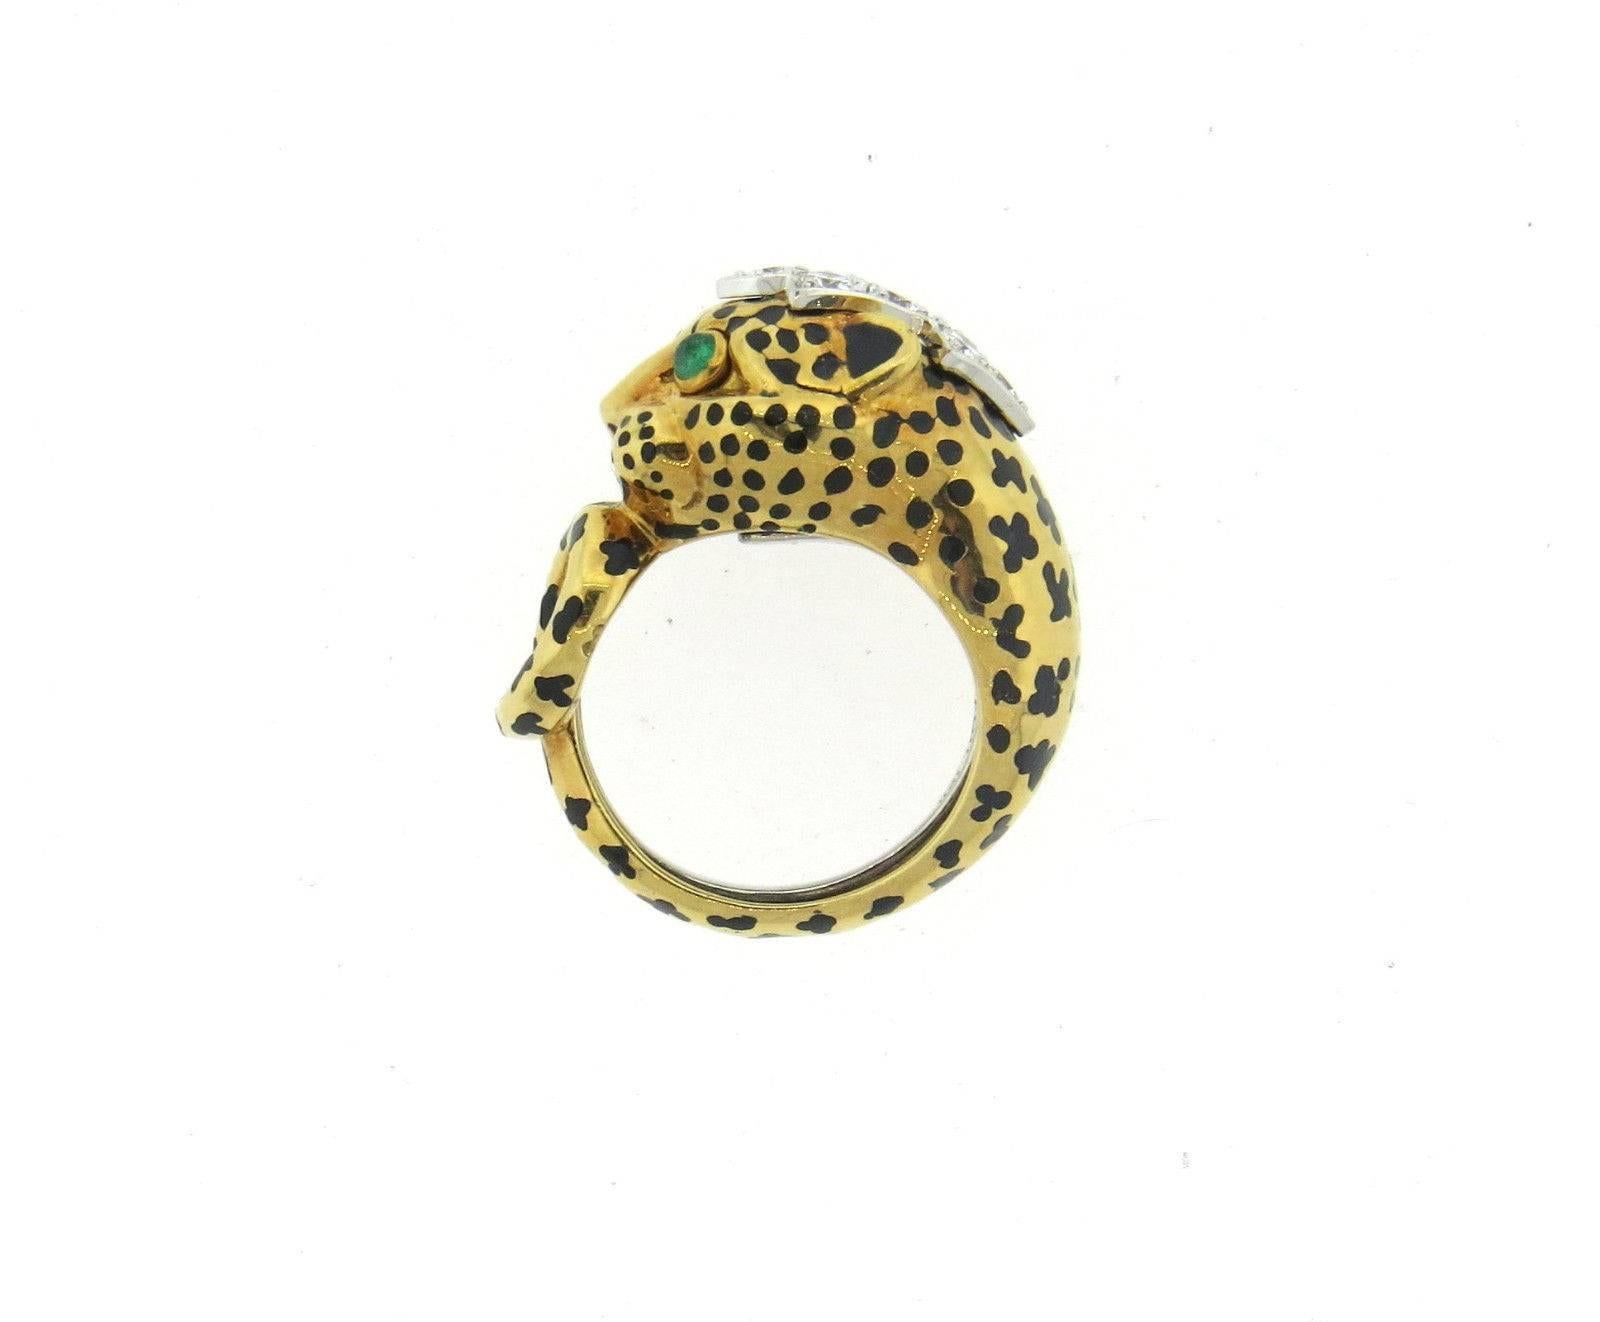 An 18k yellow gold and platinum leopard ring set with approximately 0.45ctw of GH/VS diamonds and emerald eyes.  Crafted by David Webb, the ring is a size 6, ring top is 13mm wide.  Marked: Webb plat 18k.  The weight of the ring is 14.3 grams.